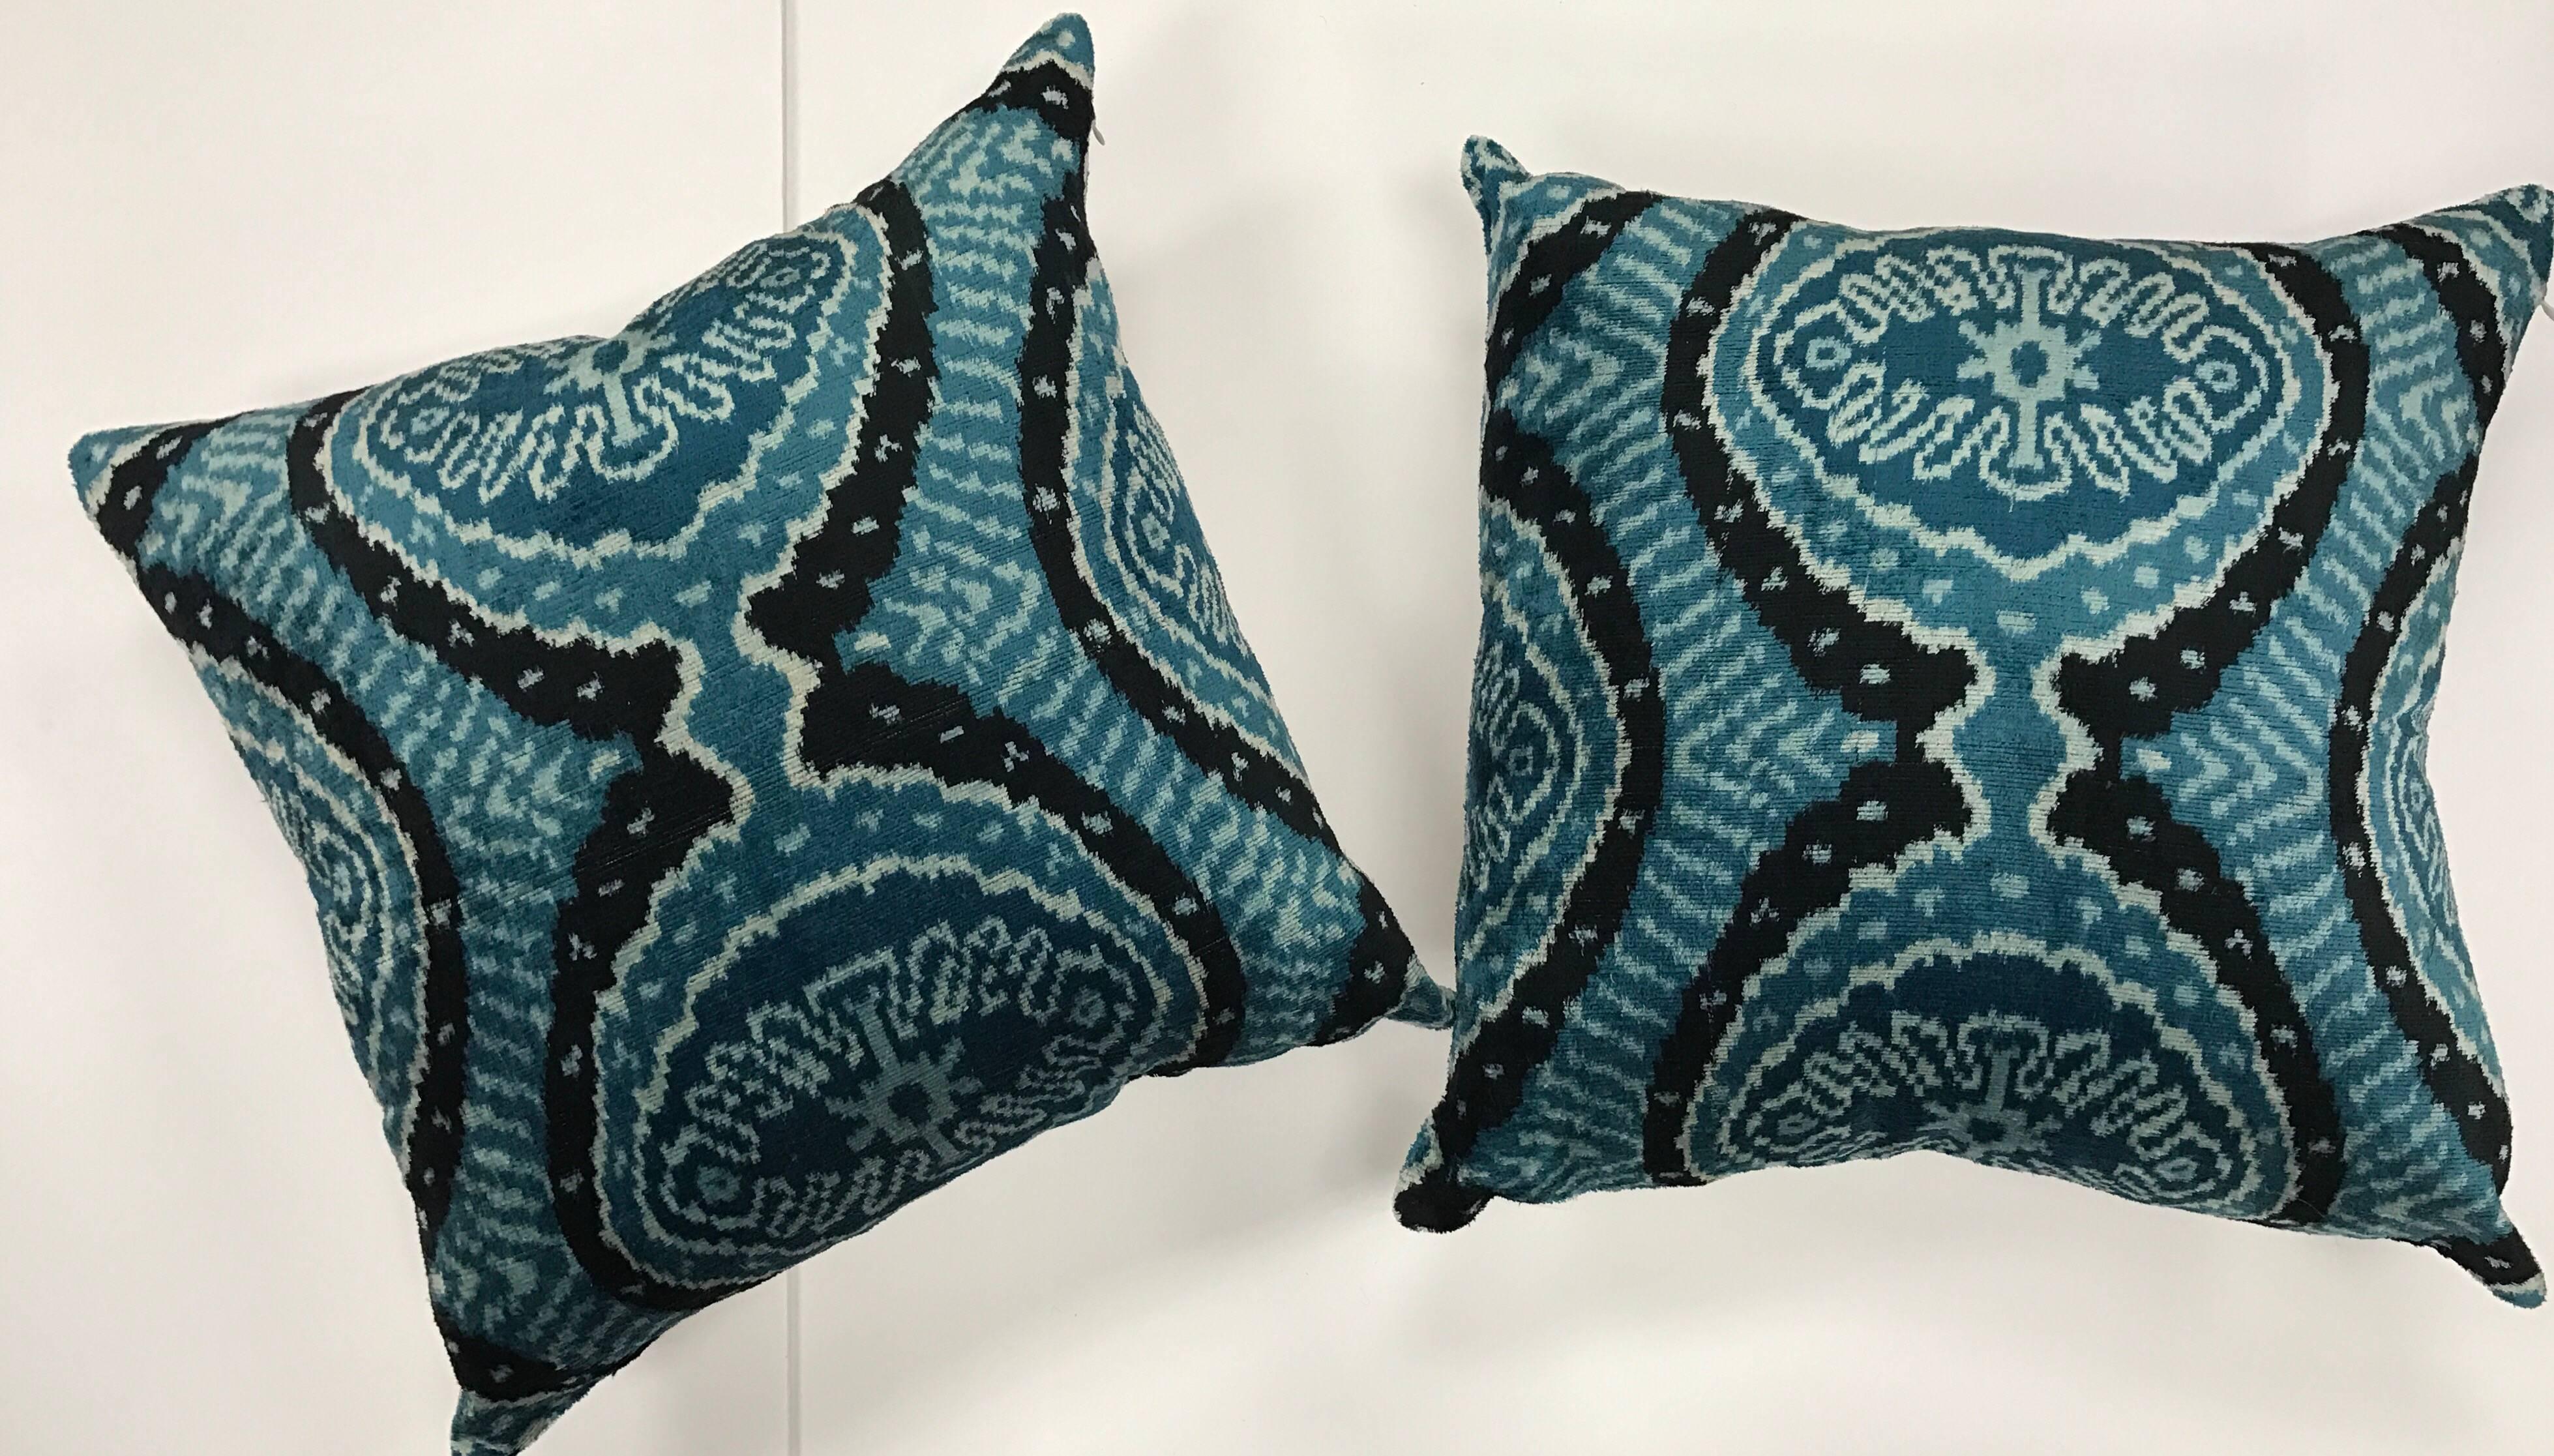 With their brilliant colors and bold design, Ikats are some of the most distinct and sought after fabrics produced in the world. This pair of handmade silk Ikat pillows are down filled and both tied and dyed by hand. This makes each Ikat design one